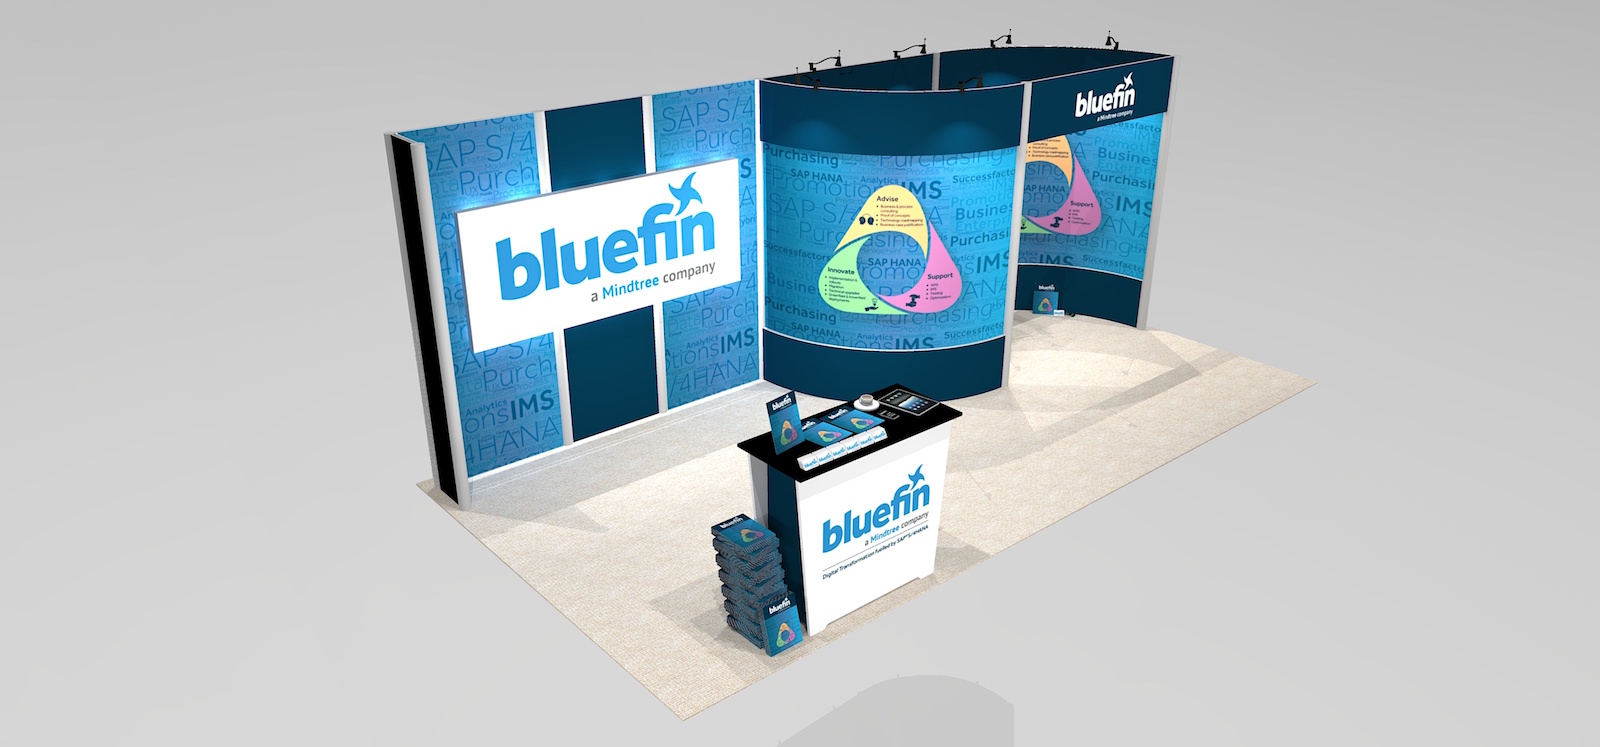 The IM13 10’ x 20’ Design is a space saving meeting area trade show exhibit layout with extra graphic space. Featuring silhouette lighting, a flat mural wall and functional counter space to make an impact with your customers. View 2